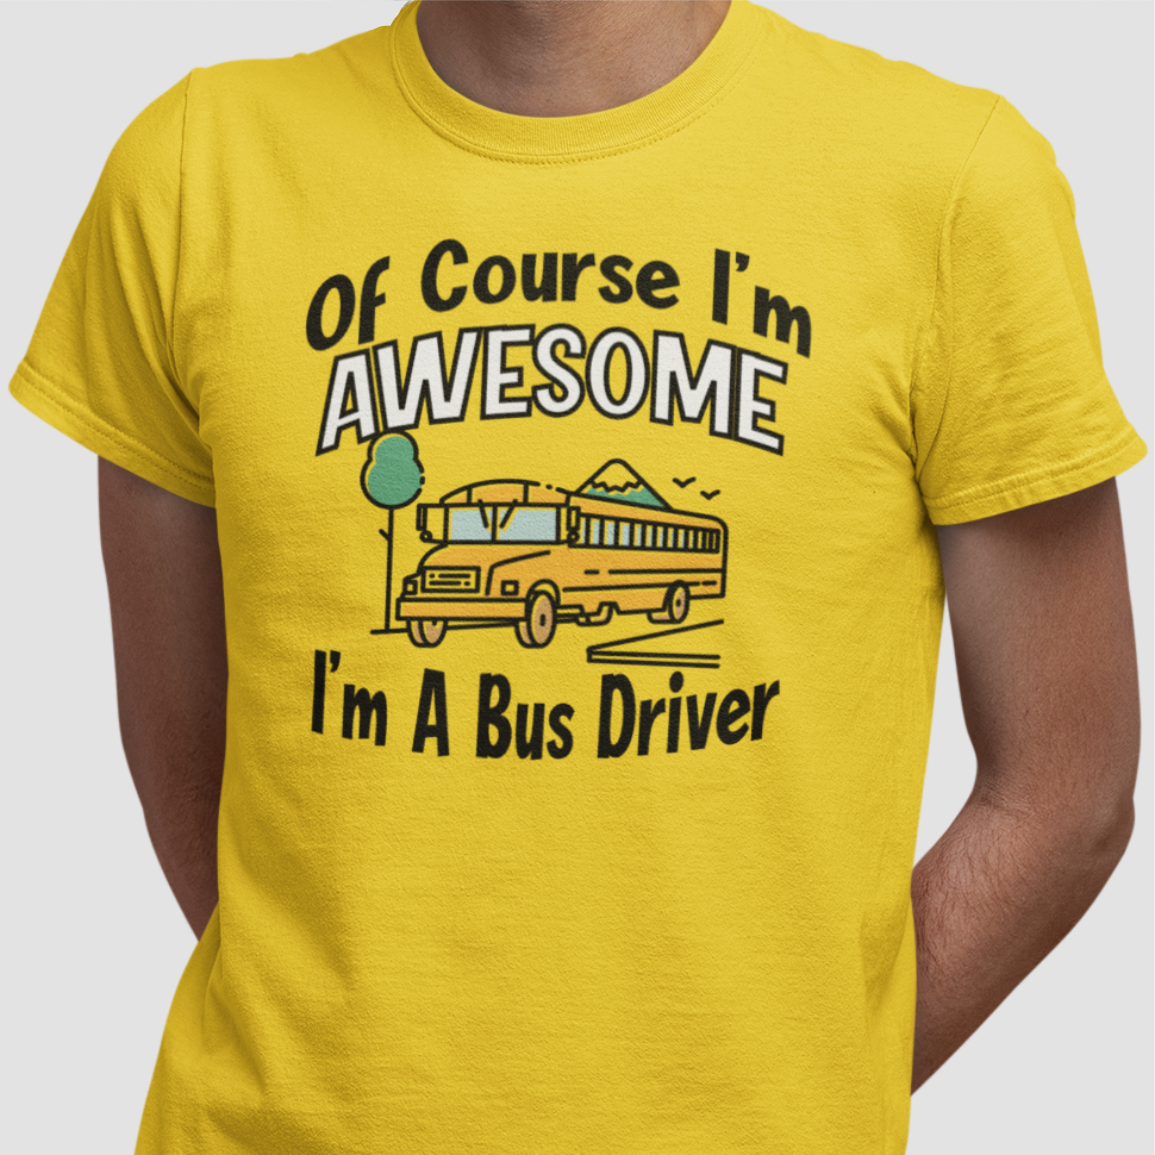 Of Course I'm Awesome Bus Driver T-Shirt